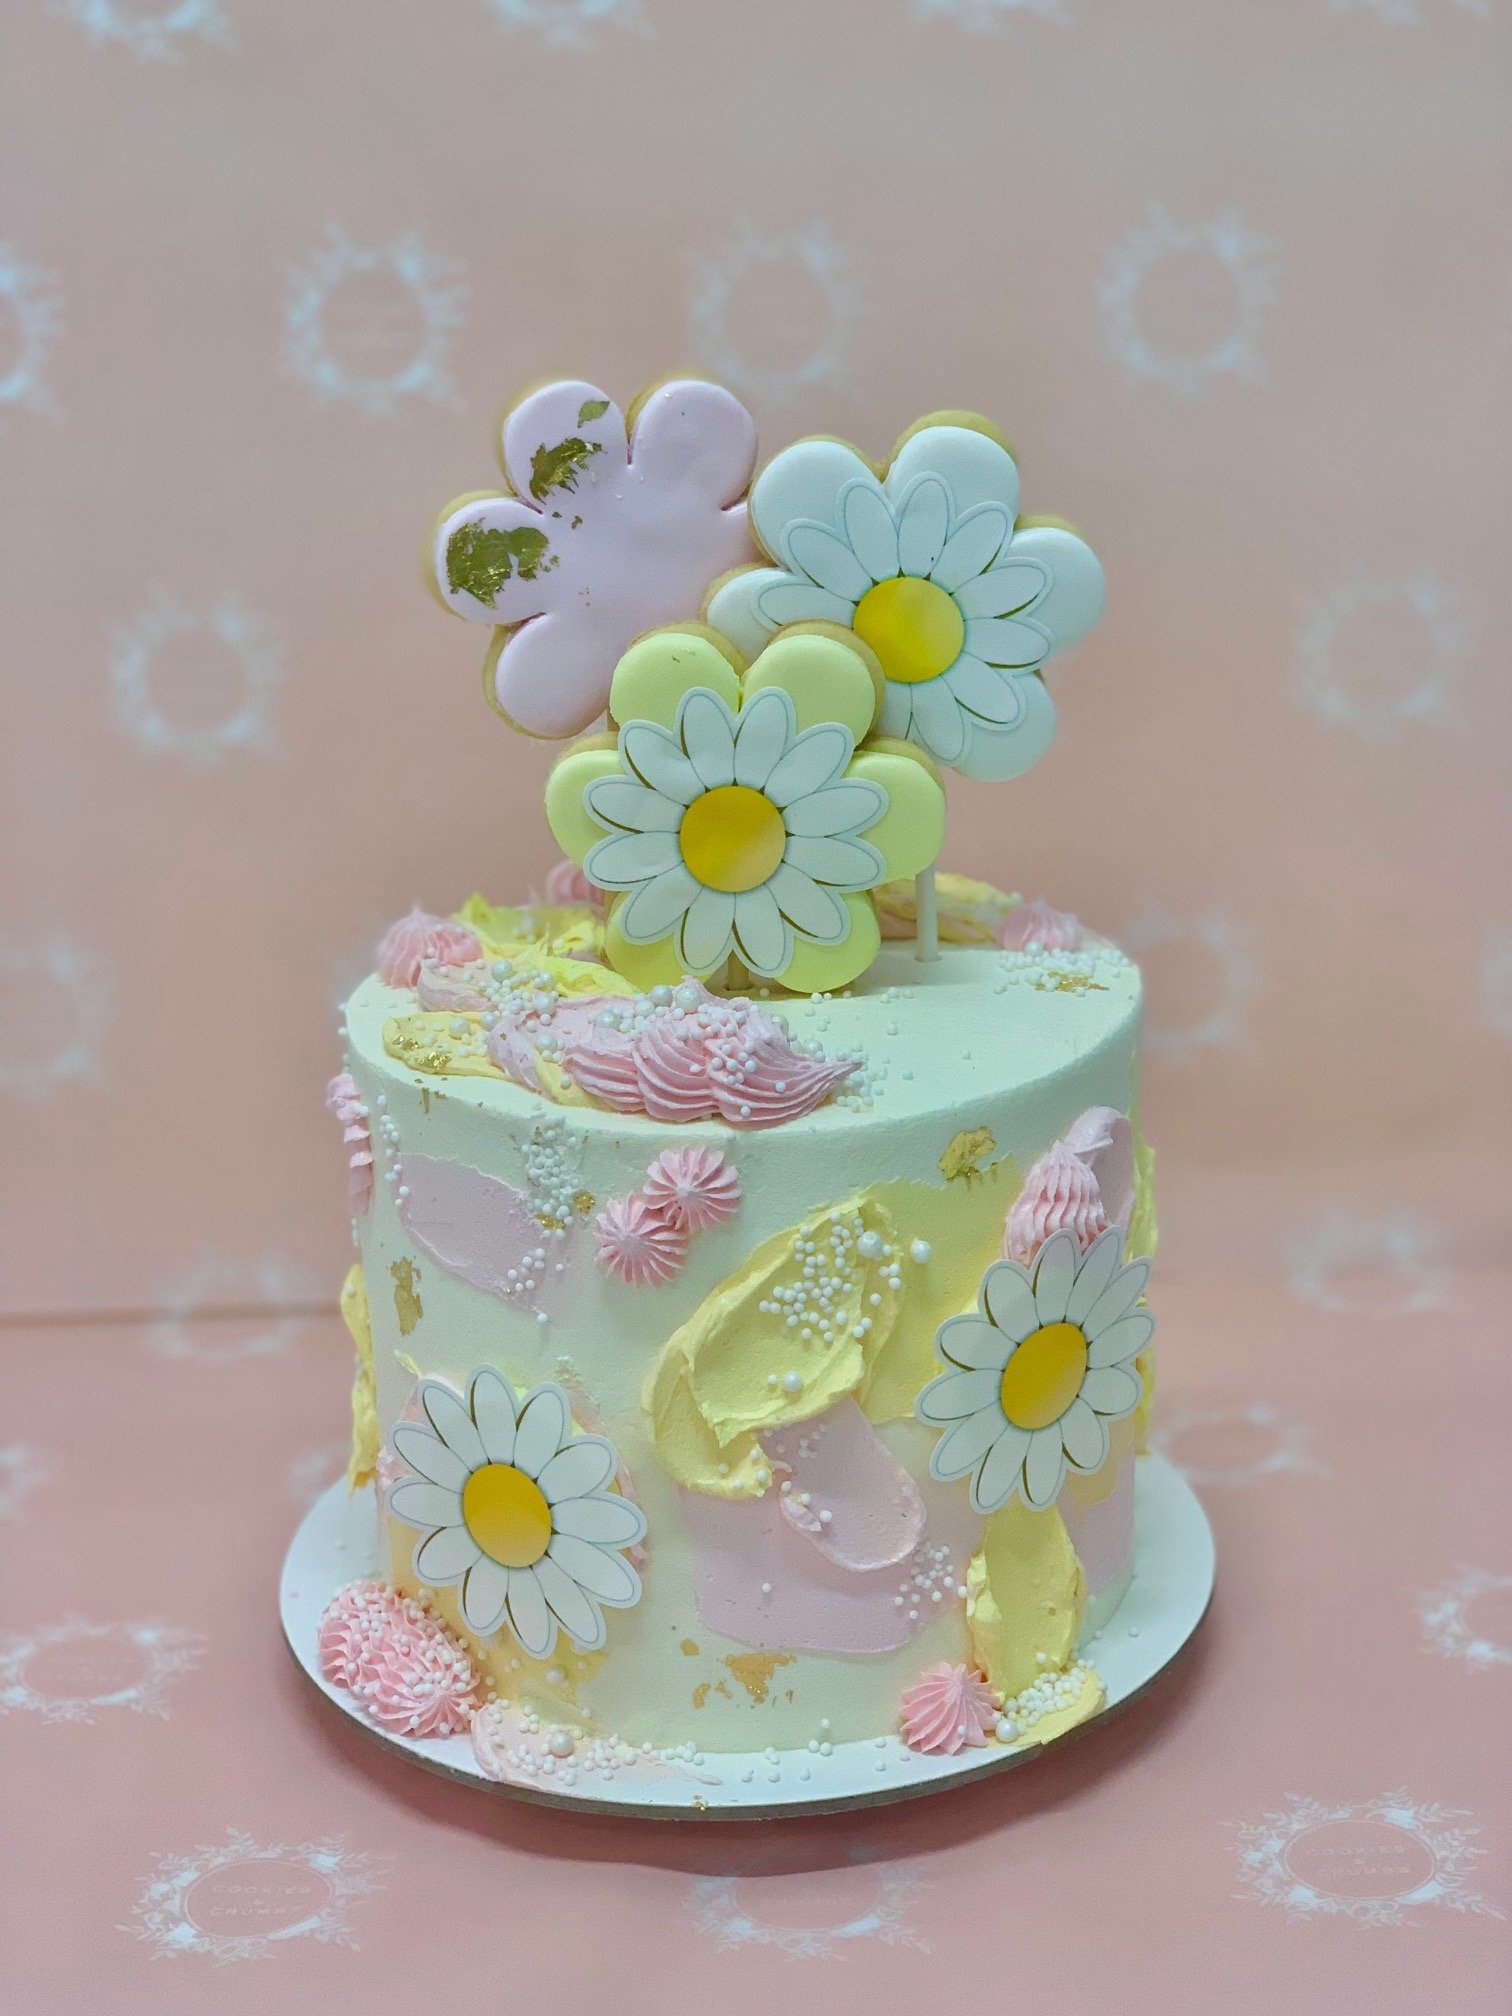 Details more than 147 cake happy birthday flowers